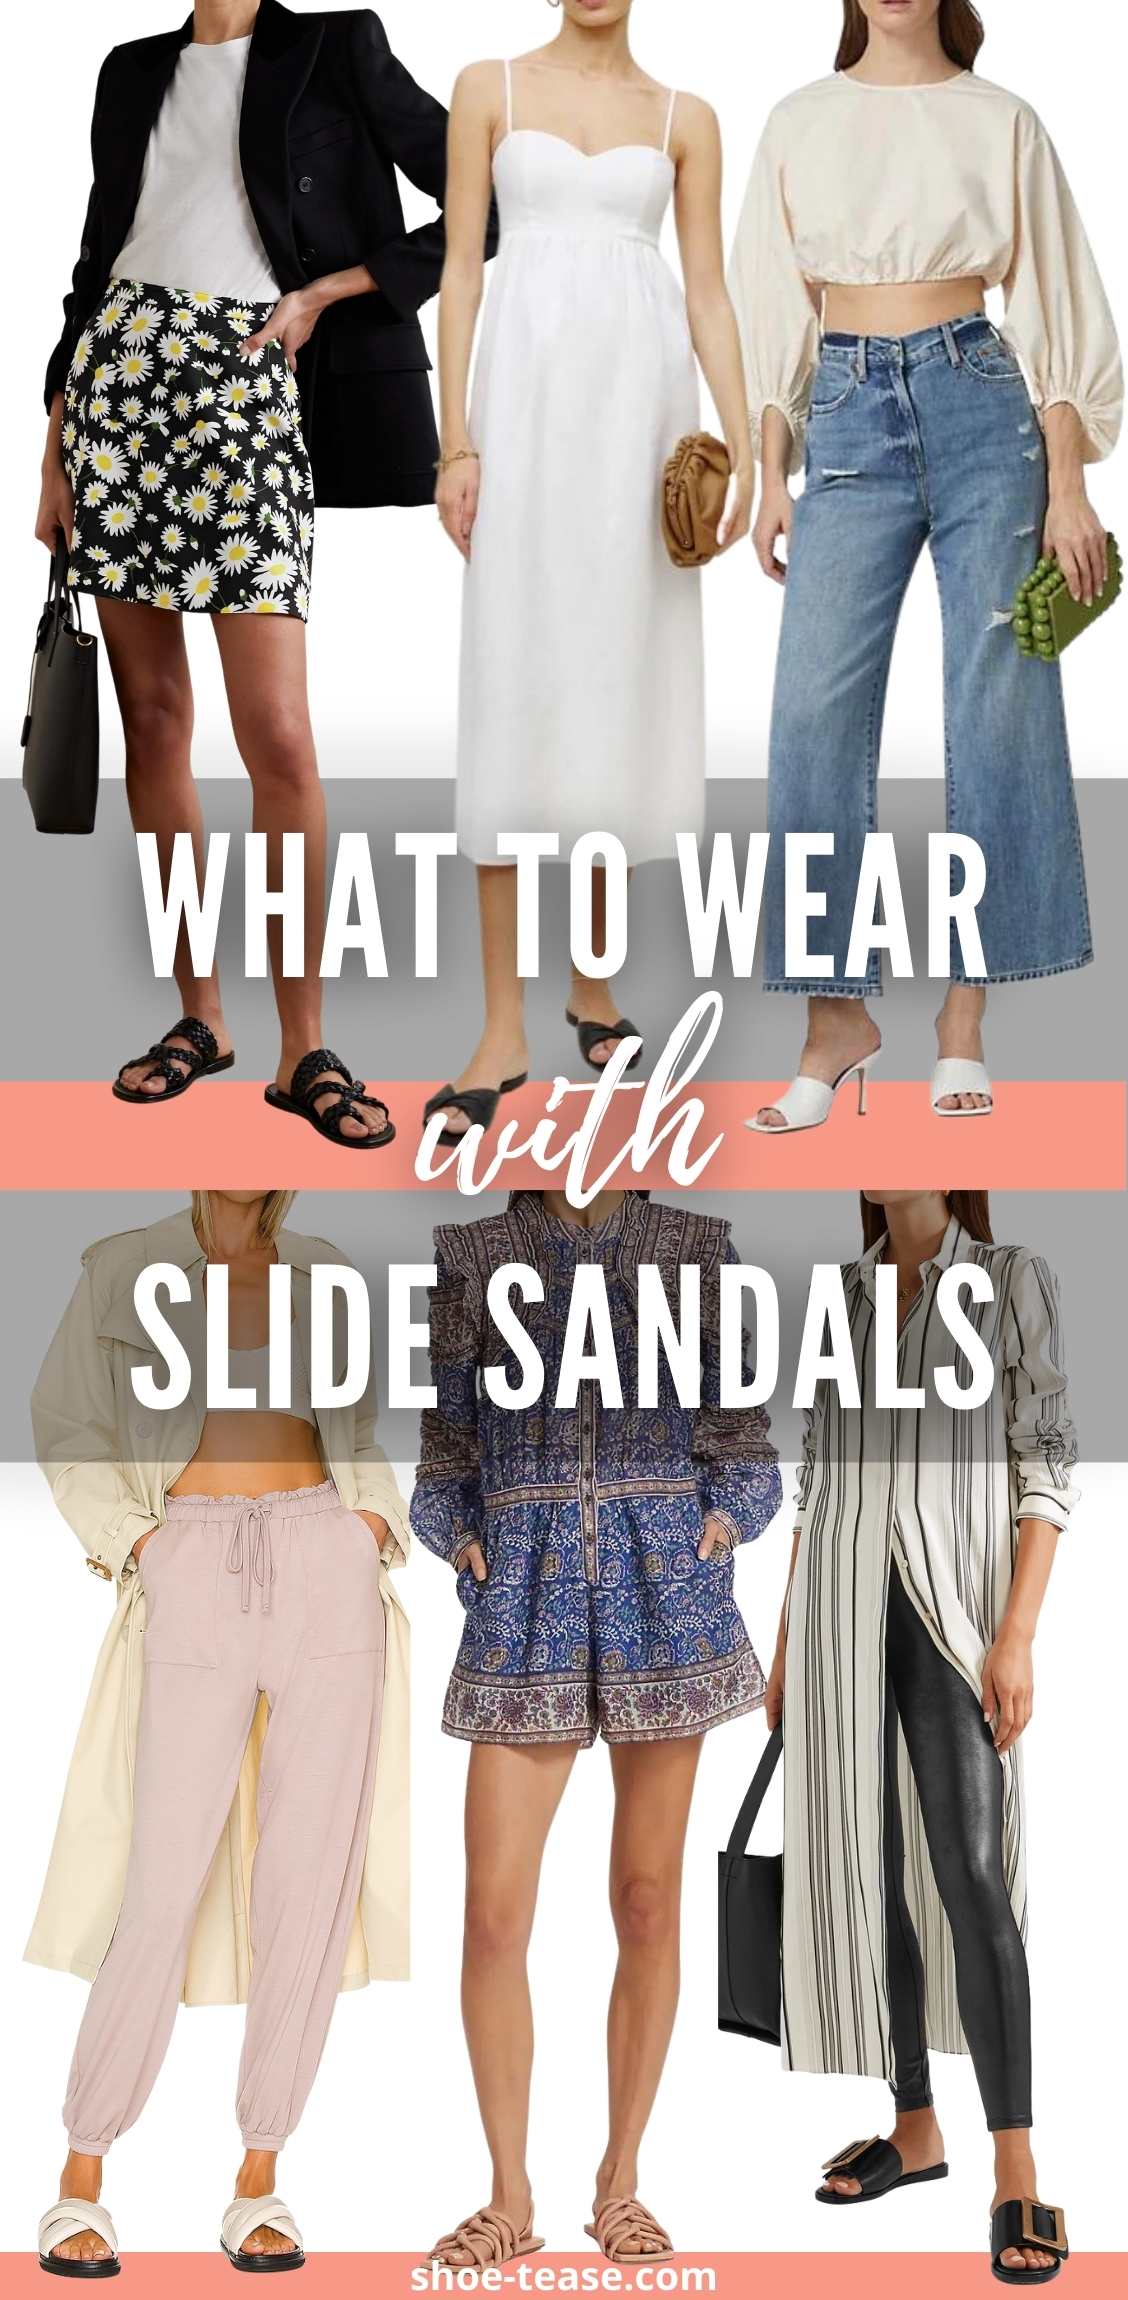 Collage of 6 women wearing different slides outfits under text reading what to wear with slides sandals.